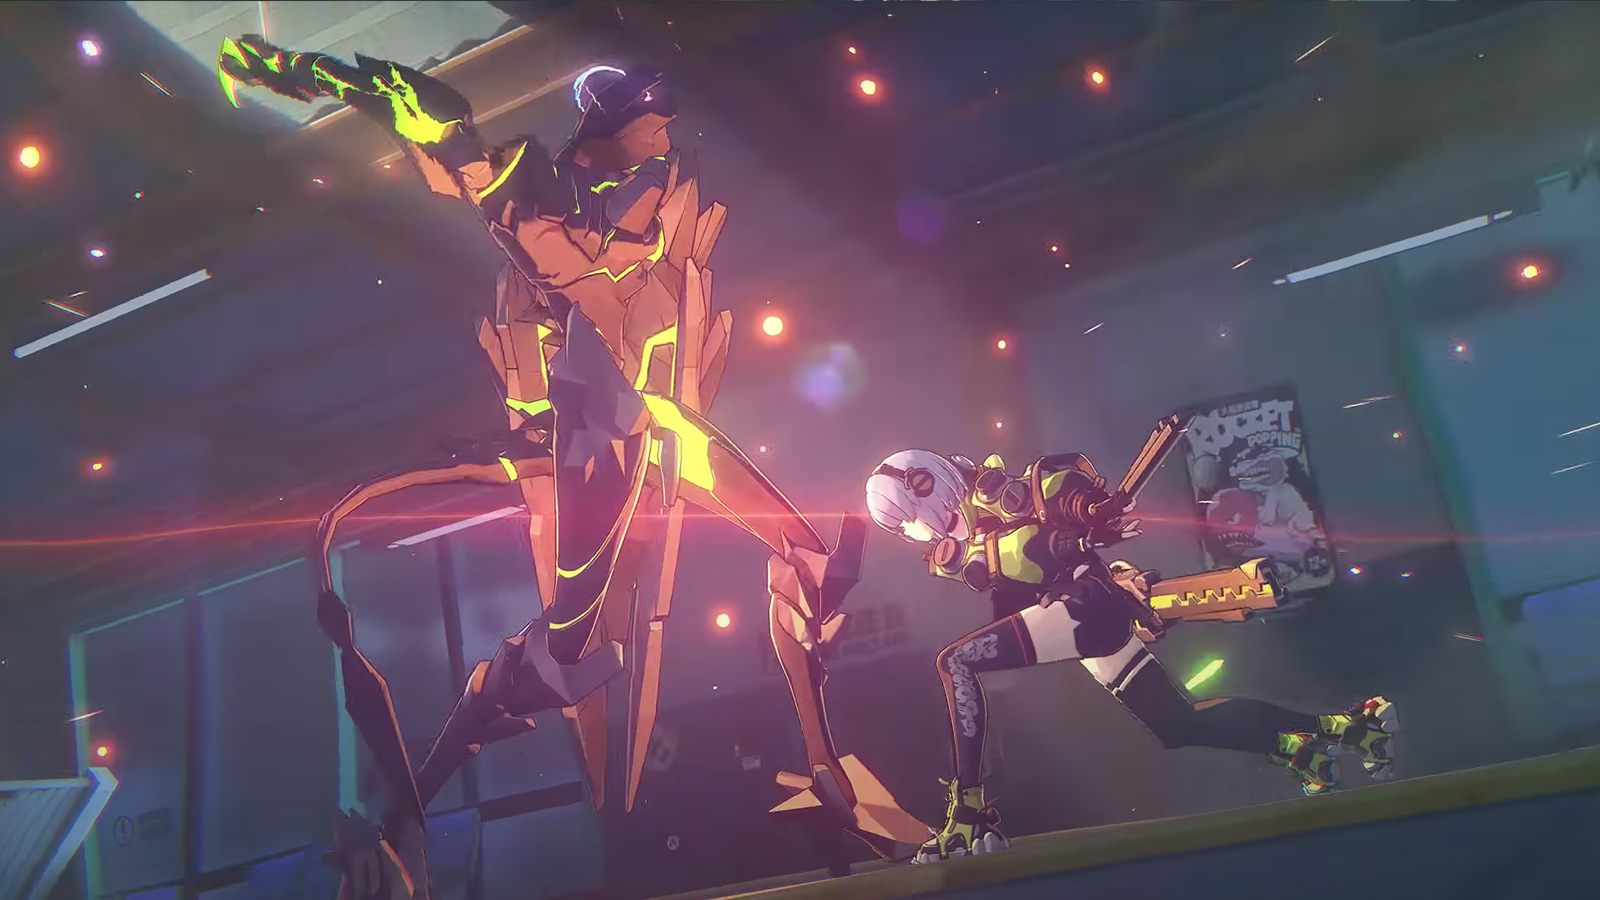 Here's what we know about the gameplay of Zenless Zone Zero from